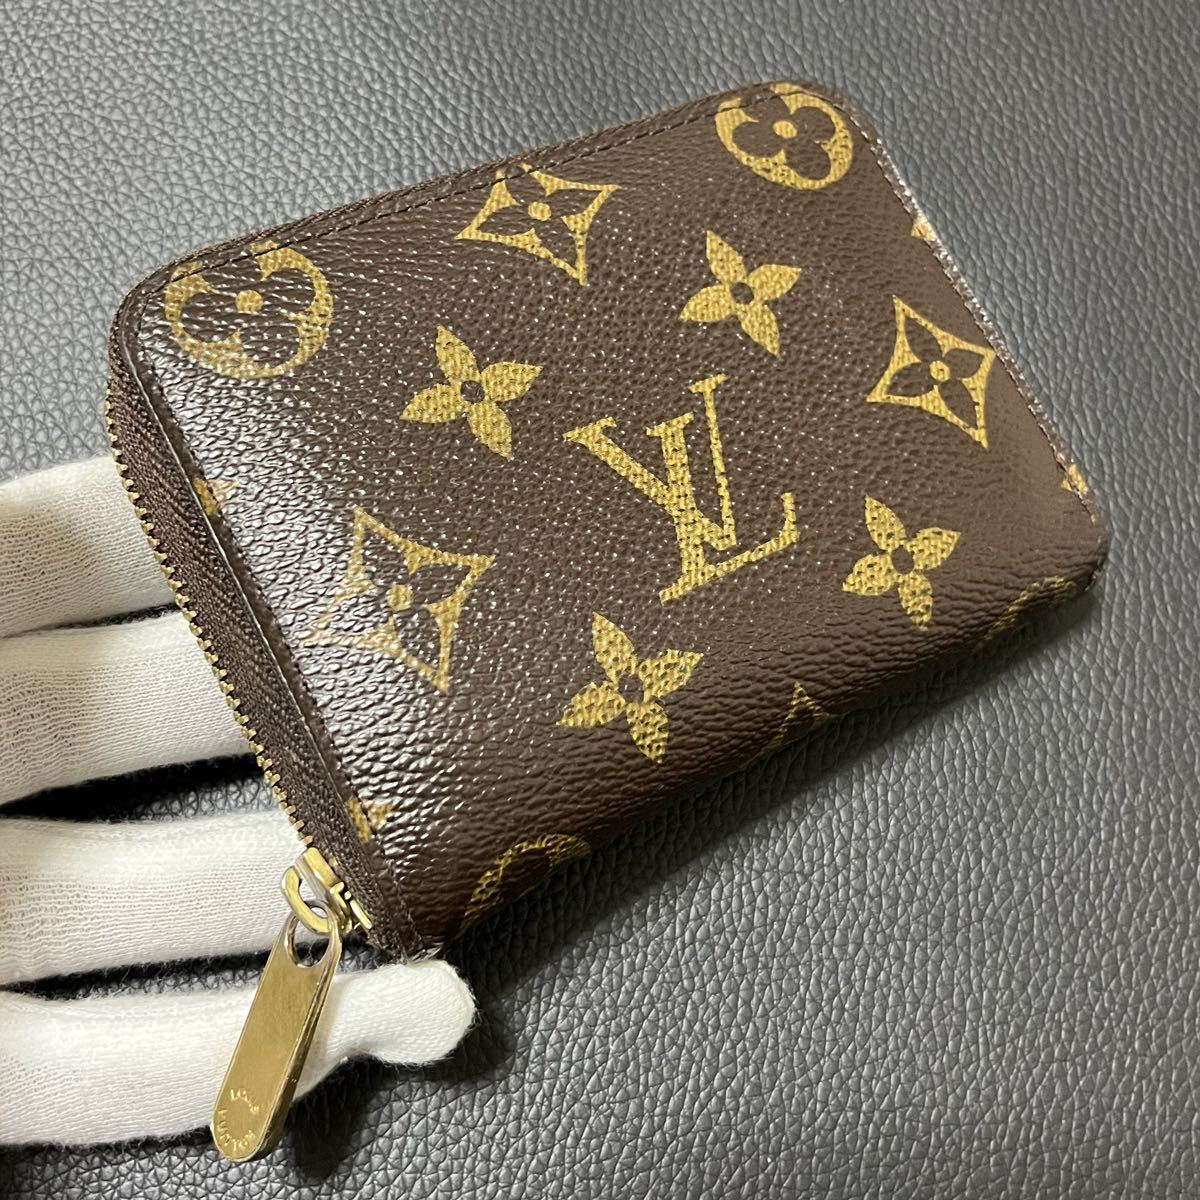 y71 ジッピーコインパース　ルイヴィトン　コインケース　モノグラム　財布　LOUIS VUITTON